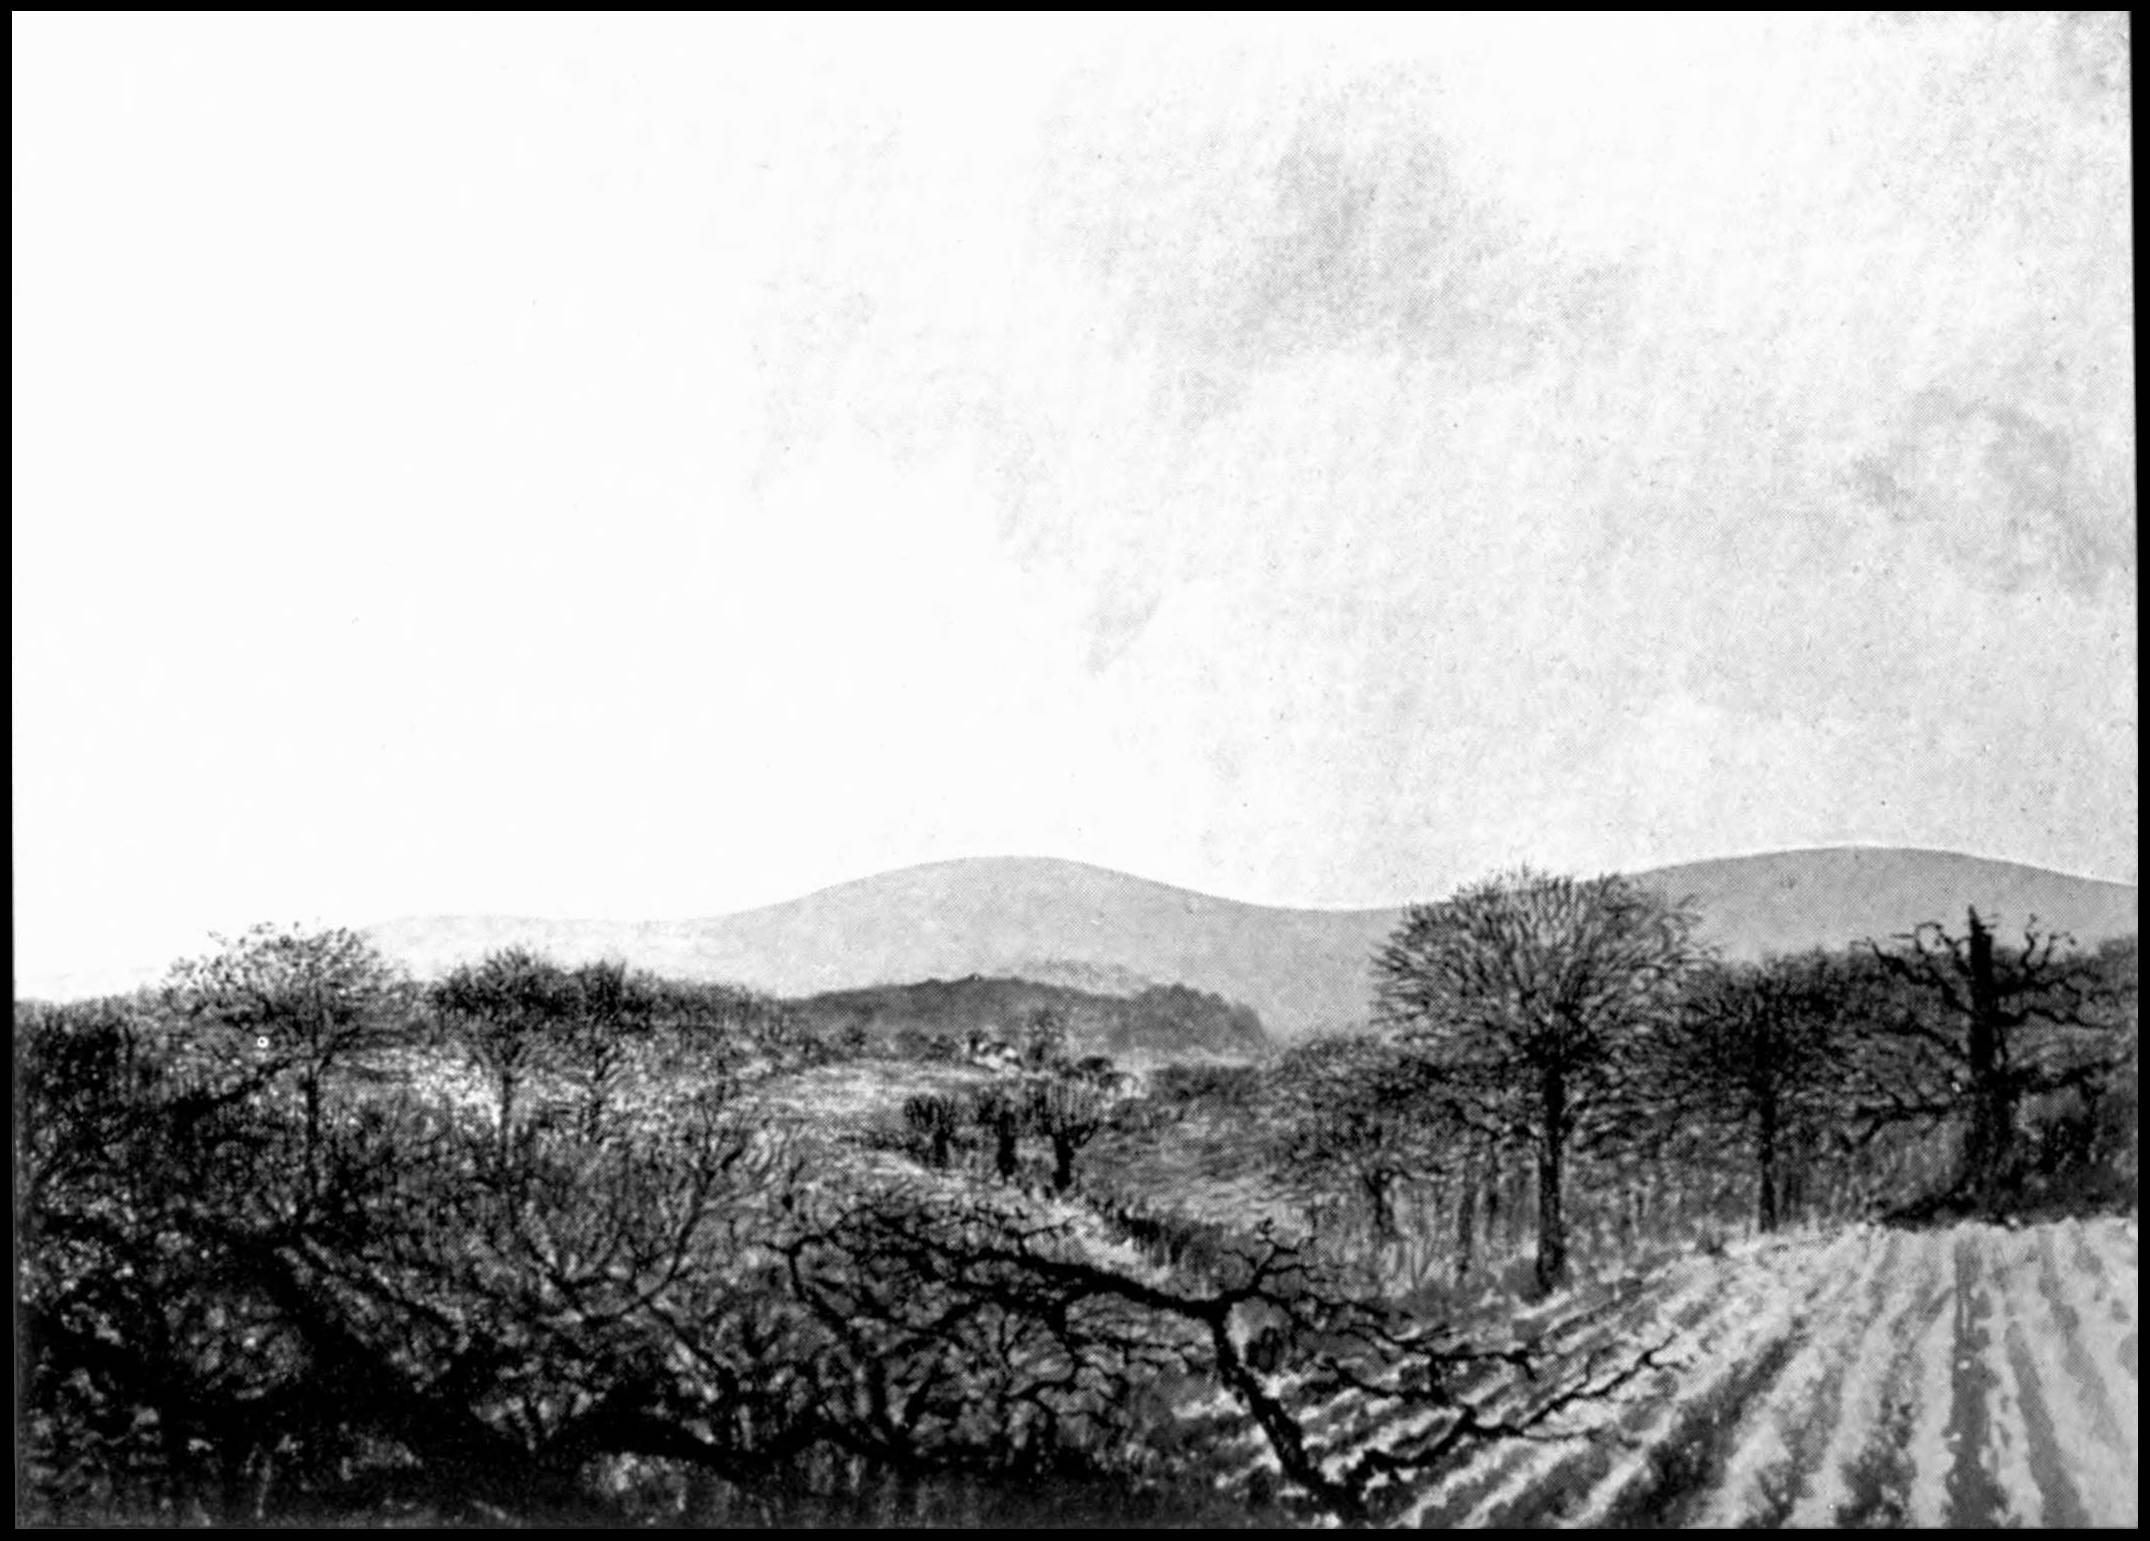 Grayscale sketch of a landscape with brambles or underbrush in the foreground to the left. A farm field is in the foreground to the right. Trees are behind, fading off into the distance.